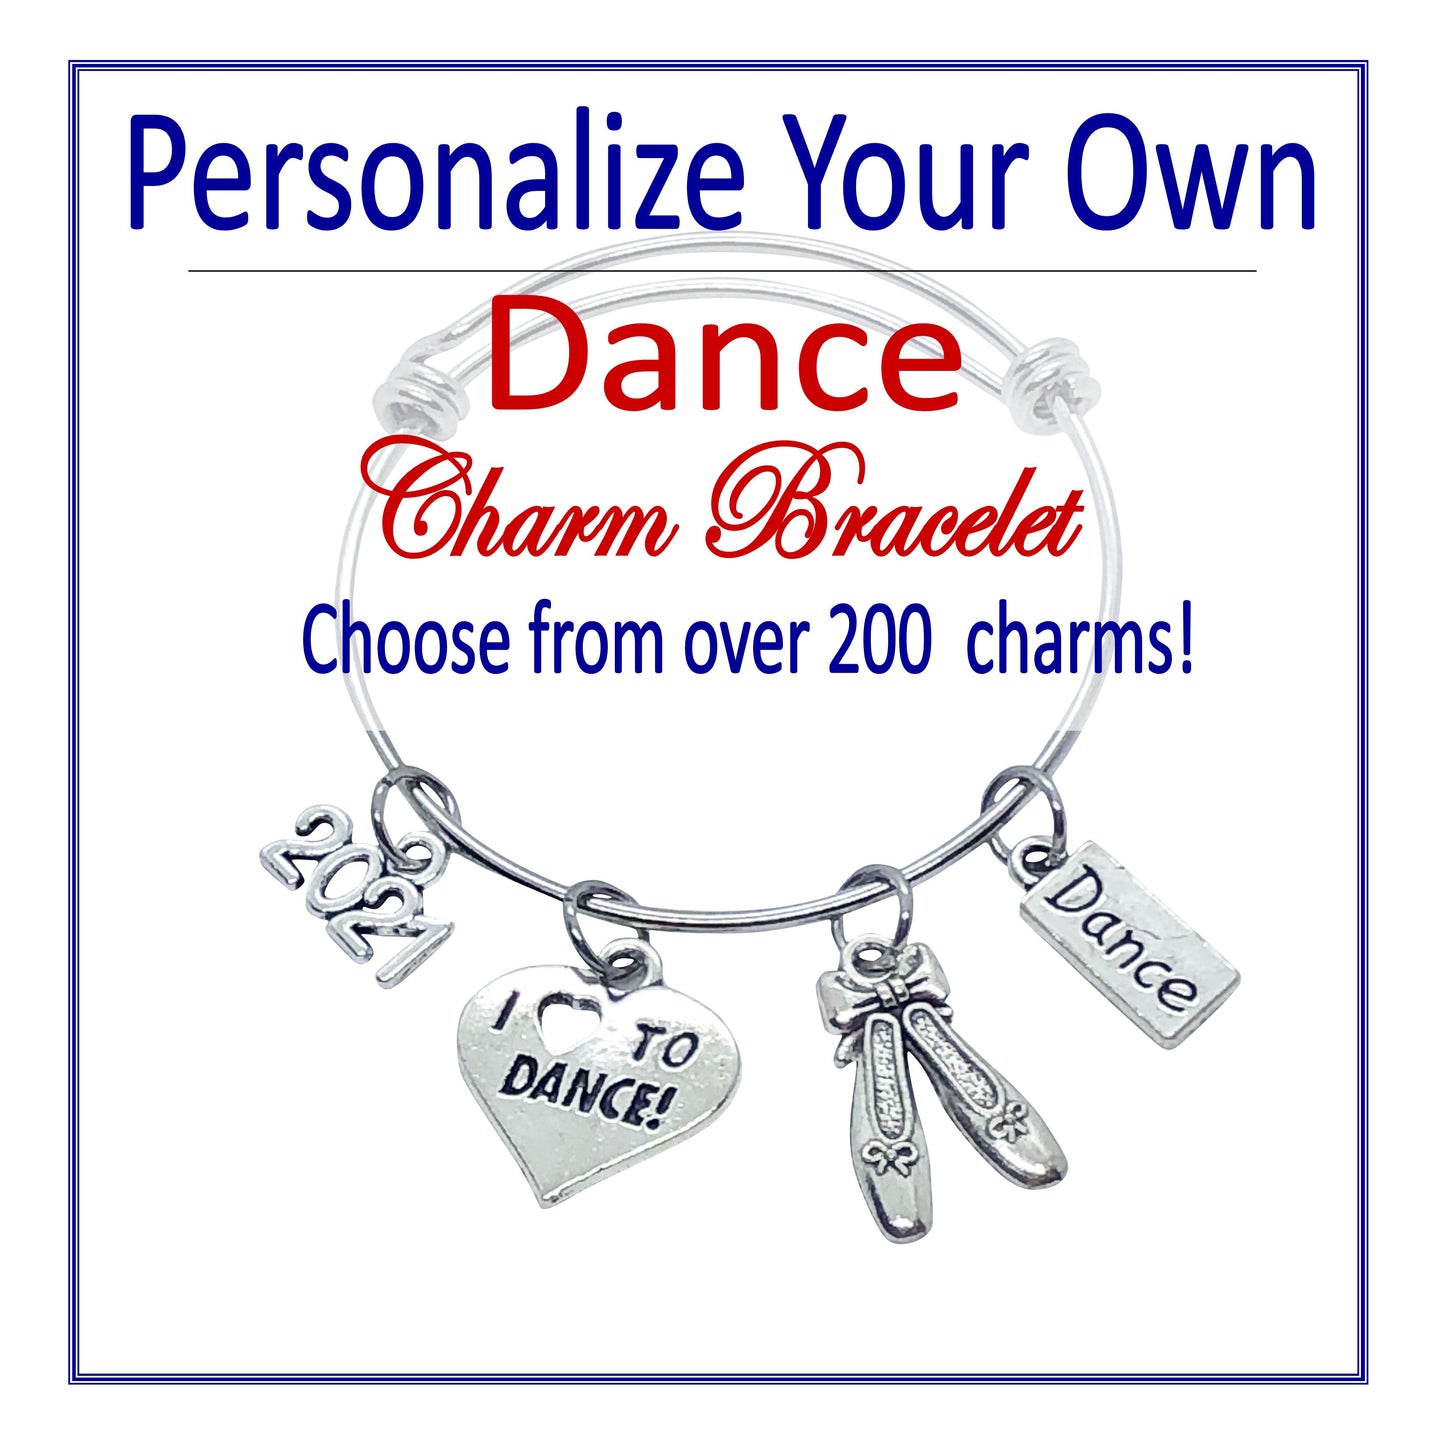 Create Your Own Dance Charm Bracelet - Cheer and Dance On Demand